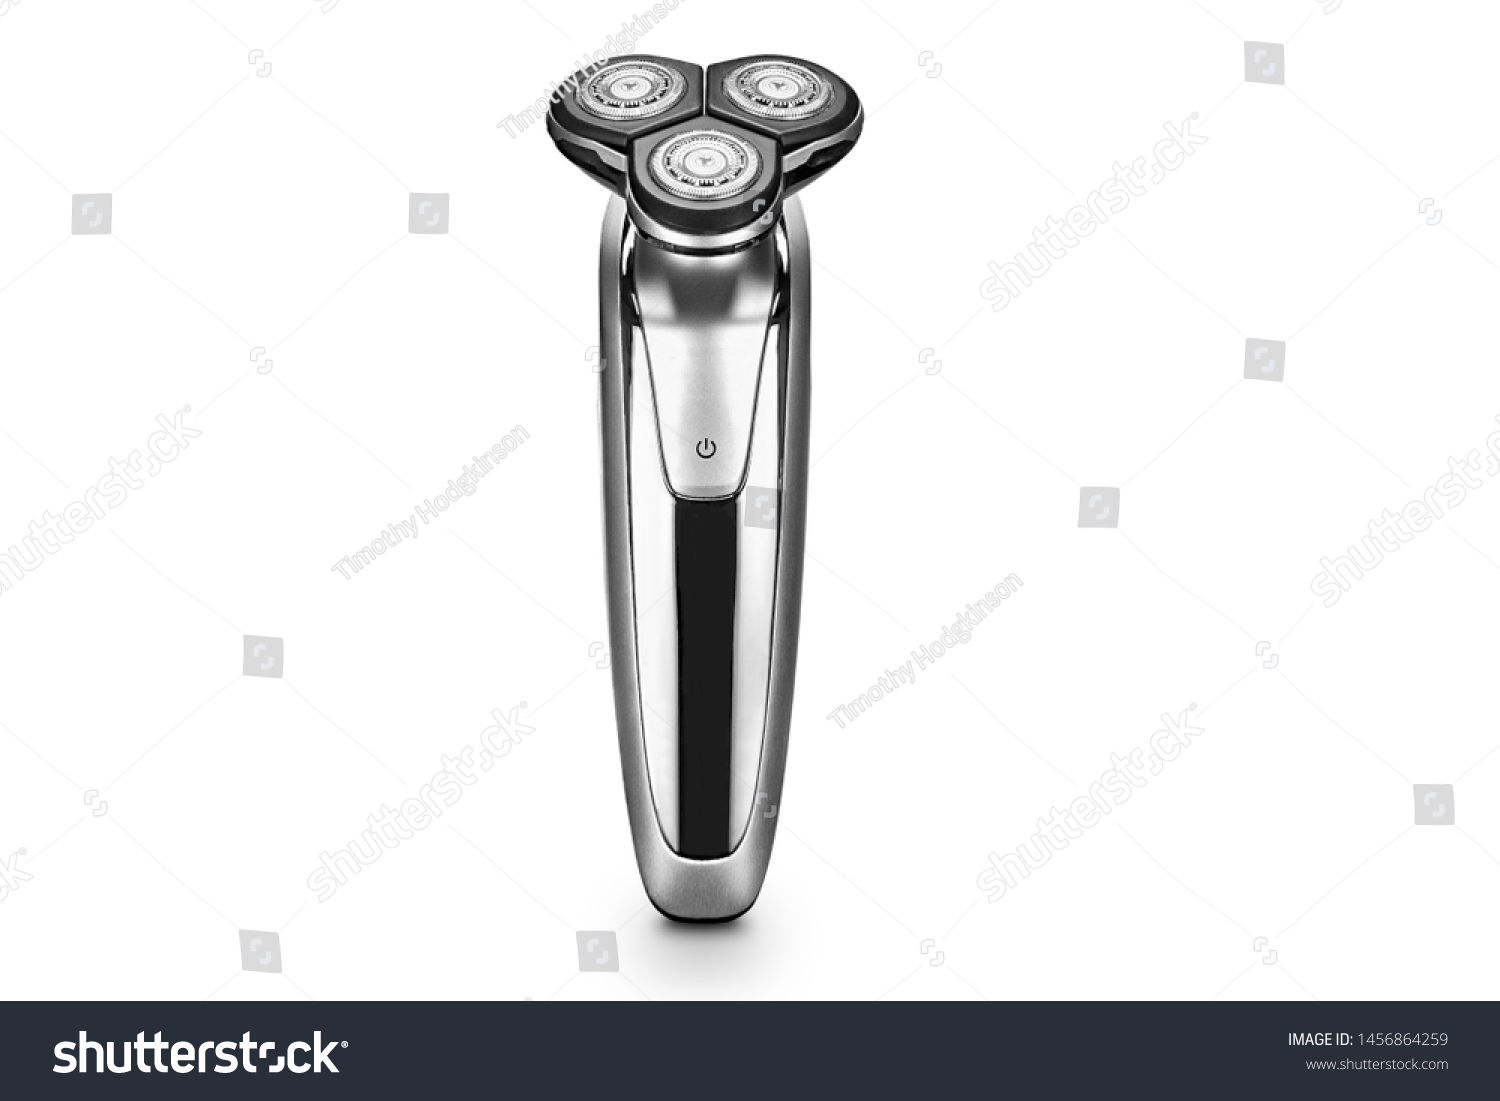 Electric Razor, Shaver, Isolated on a White Background. #1456864259